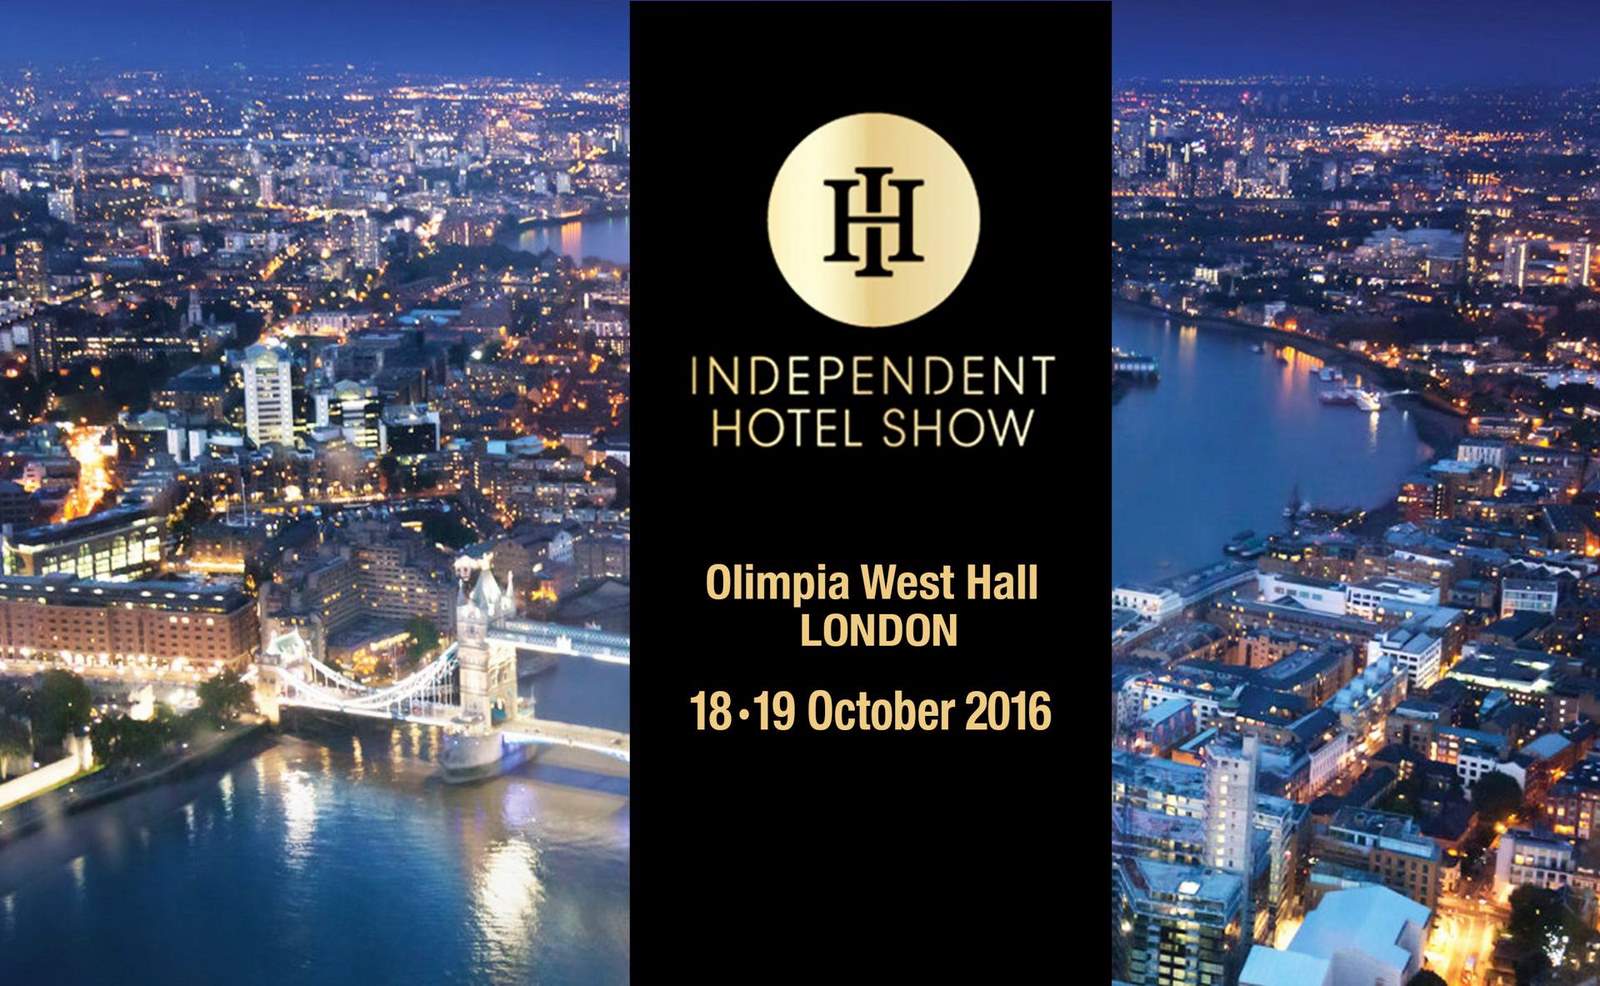  Independent Hotel Show 2016